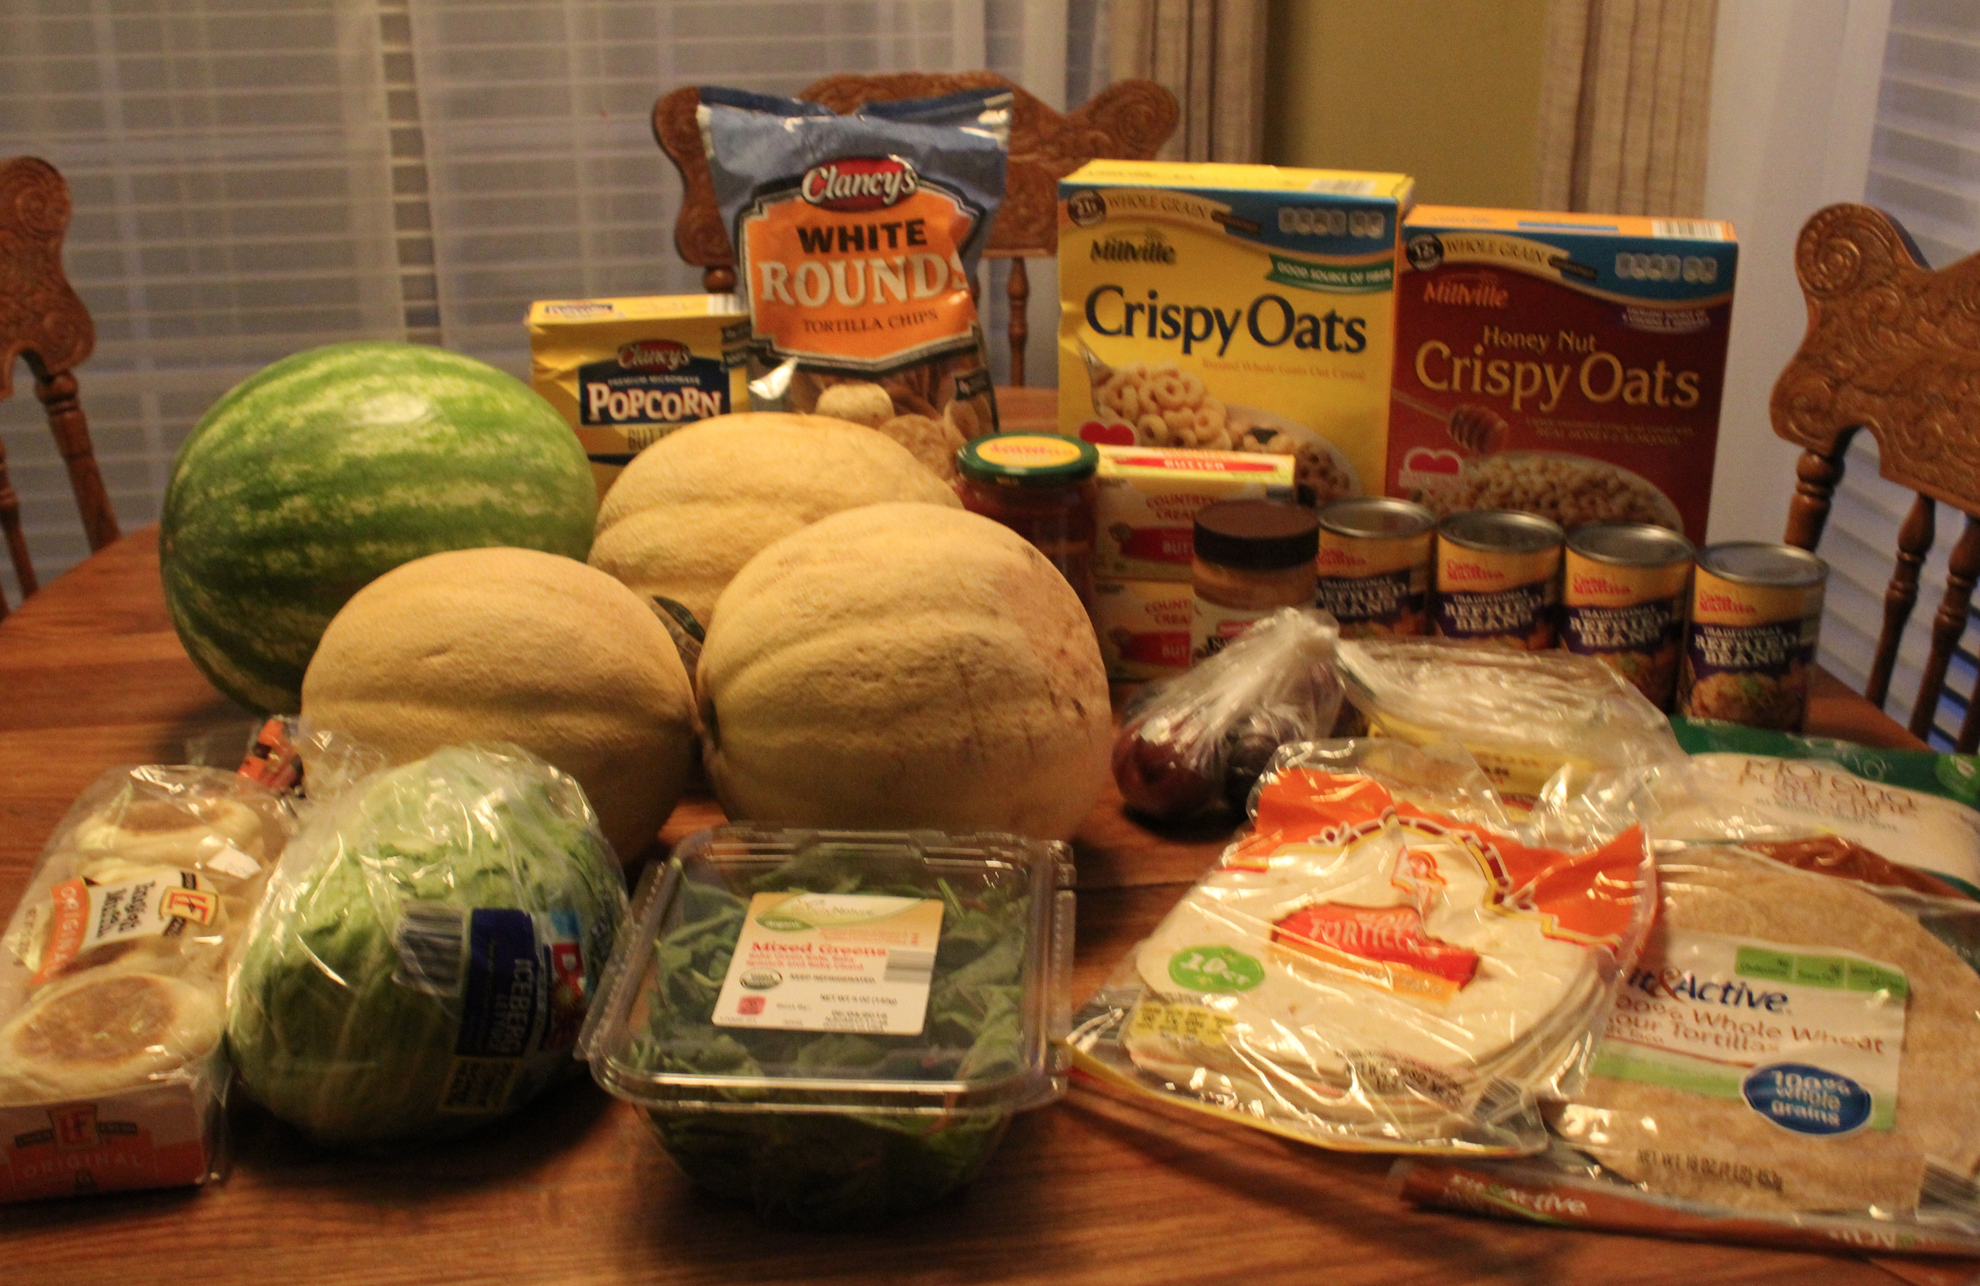 I only spent $35 and got all of these groceries!